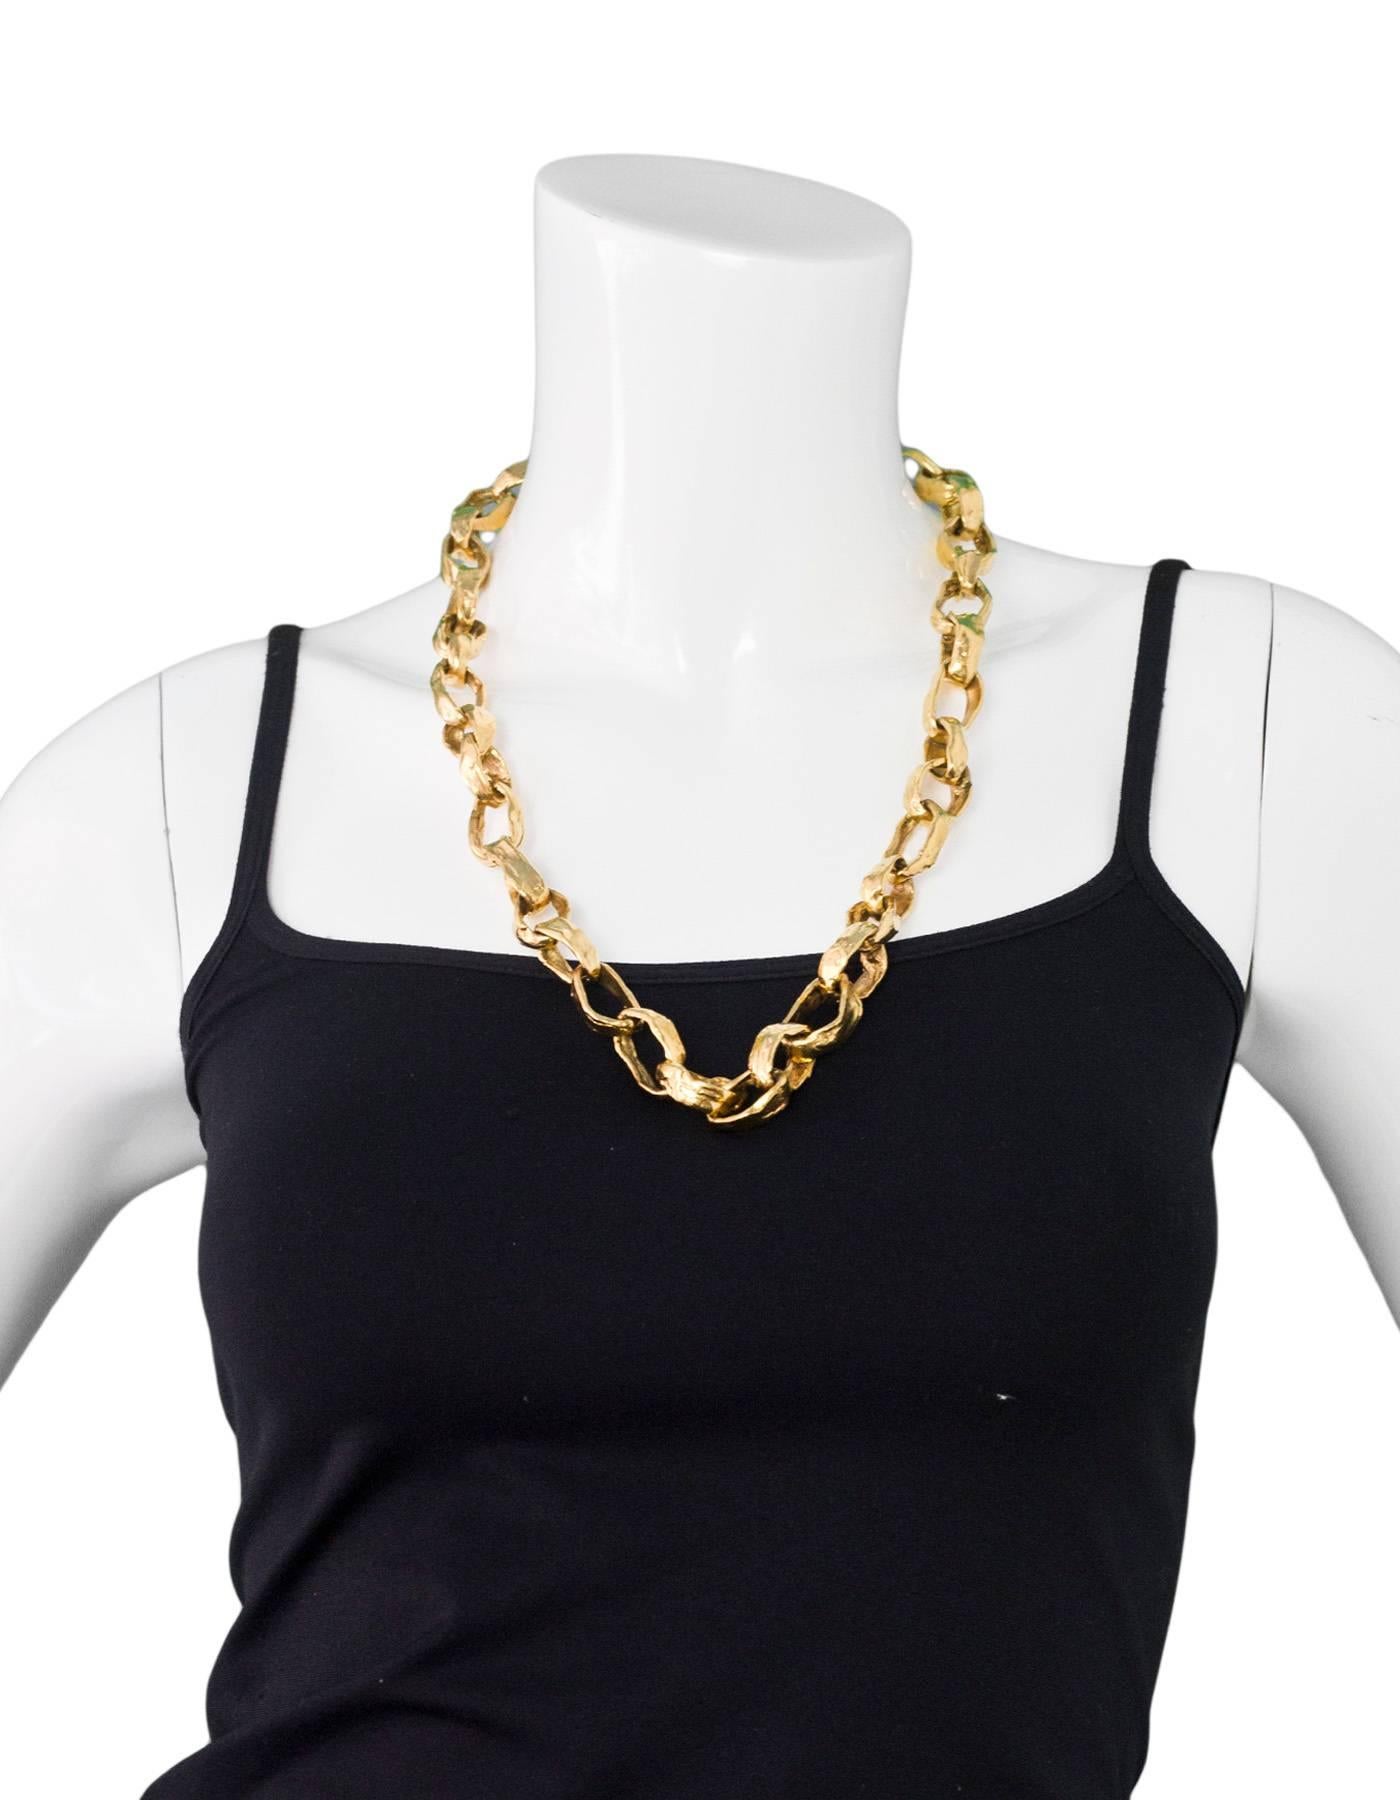 Goosens Goldtone Chain-Link Necklace

In the 1950's, Robert Goossens worked with Coco Chanel to design jewelry to accompany her fashion designs.  Goossens would create original pieces for Mademoiselle Chanel made of real gold and genuine stones,